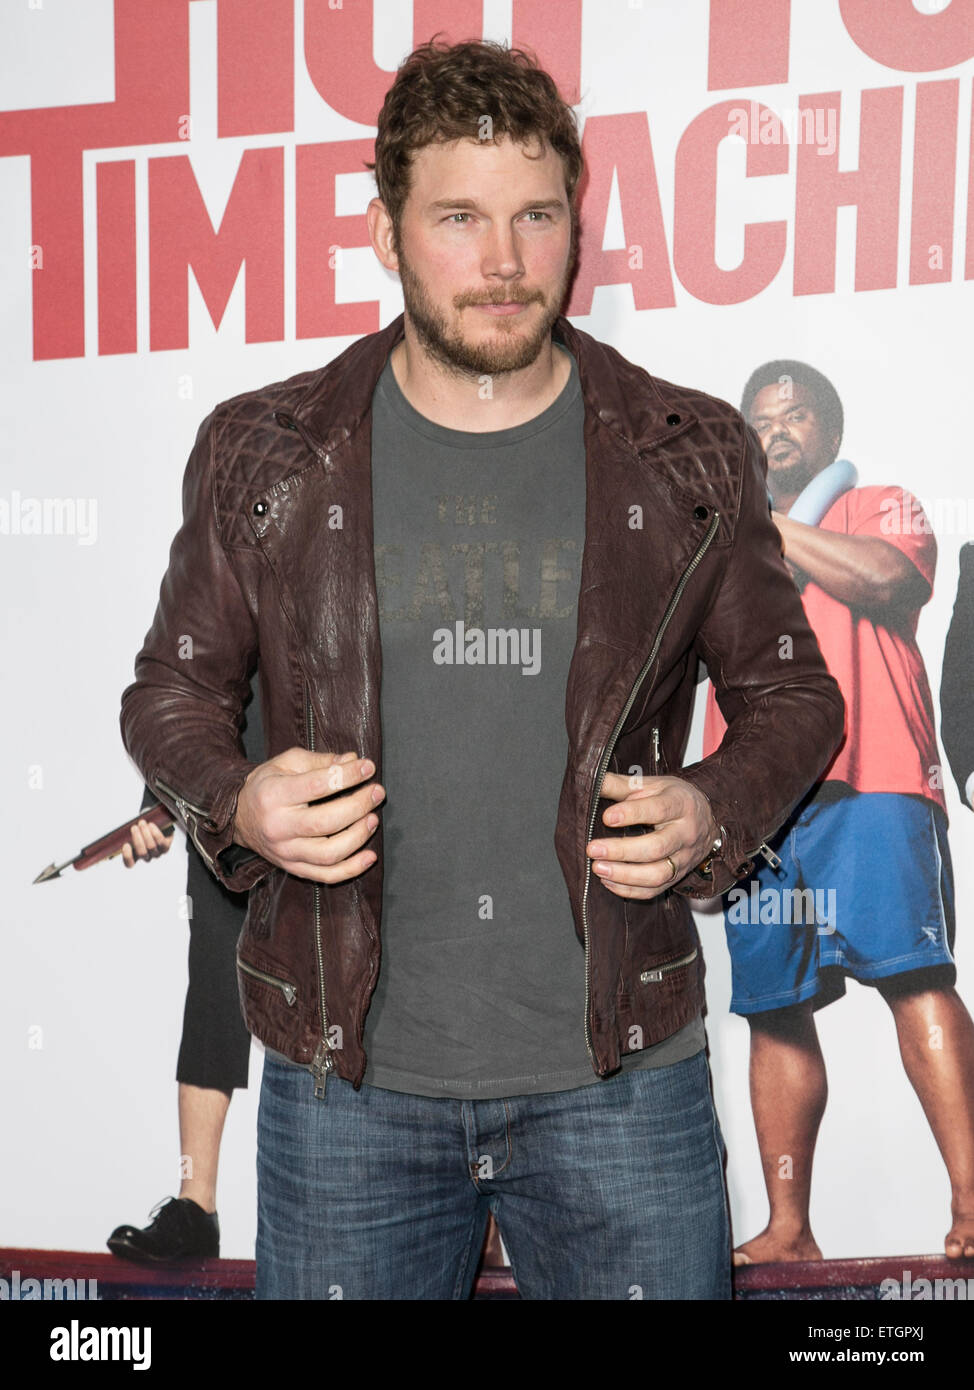 Los Angeles premiere of 'Hot Tub Time Machine 2' at the Bruin Theater - Red Carpet Arrivals  Featuring: Chris Pratt Where: Los Angeles, California, United States When: 18 Feb 2015 Credit: Brian To/WENN.com Stock Photo